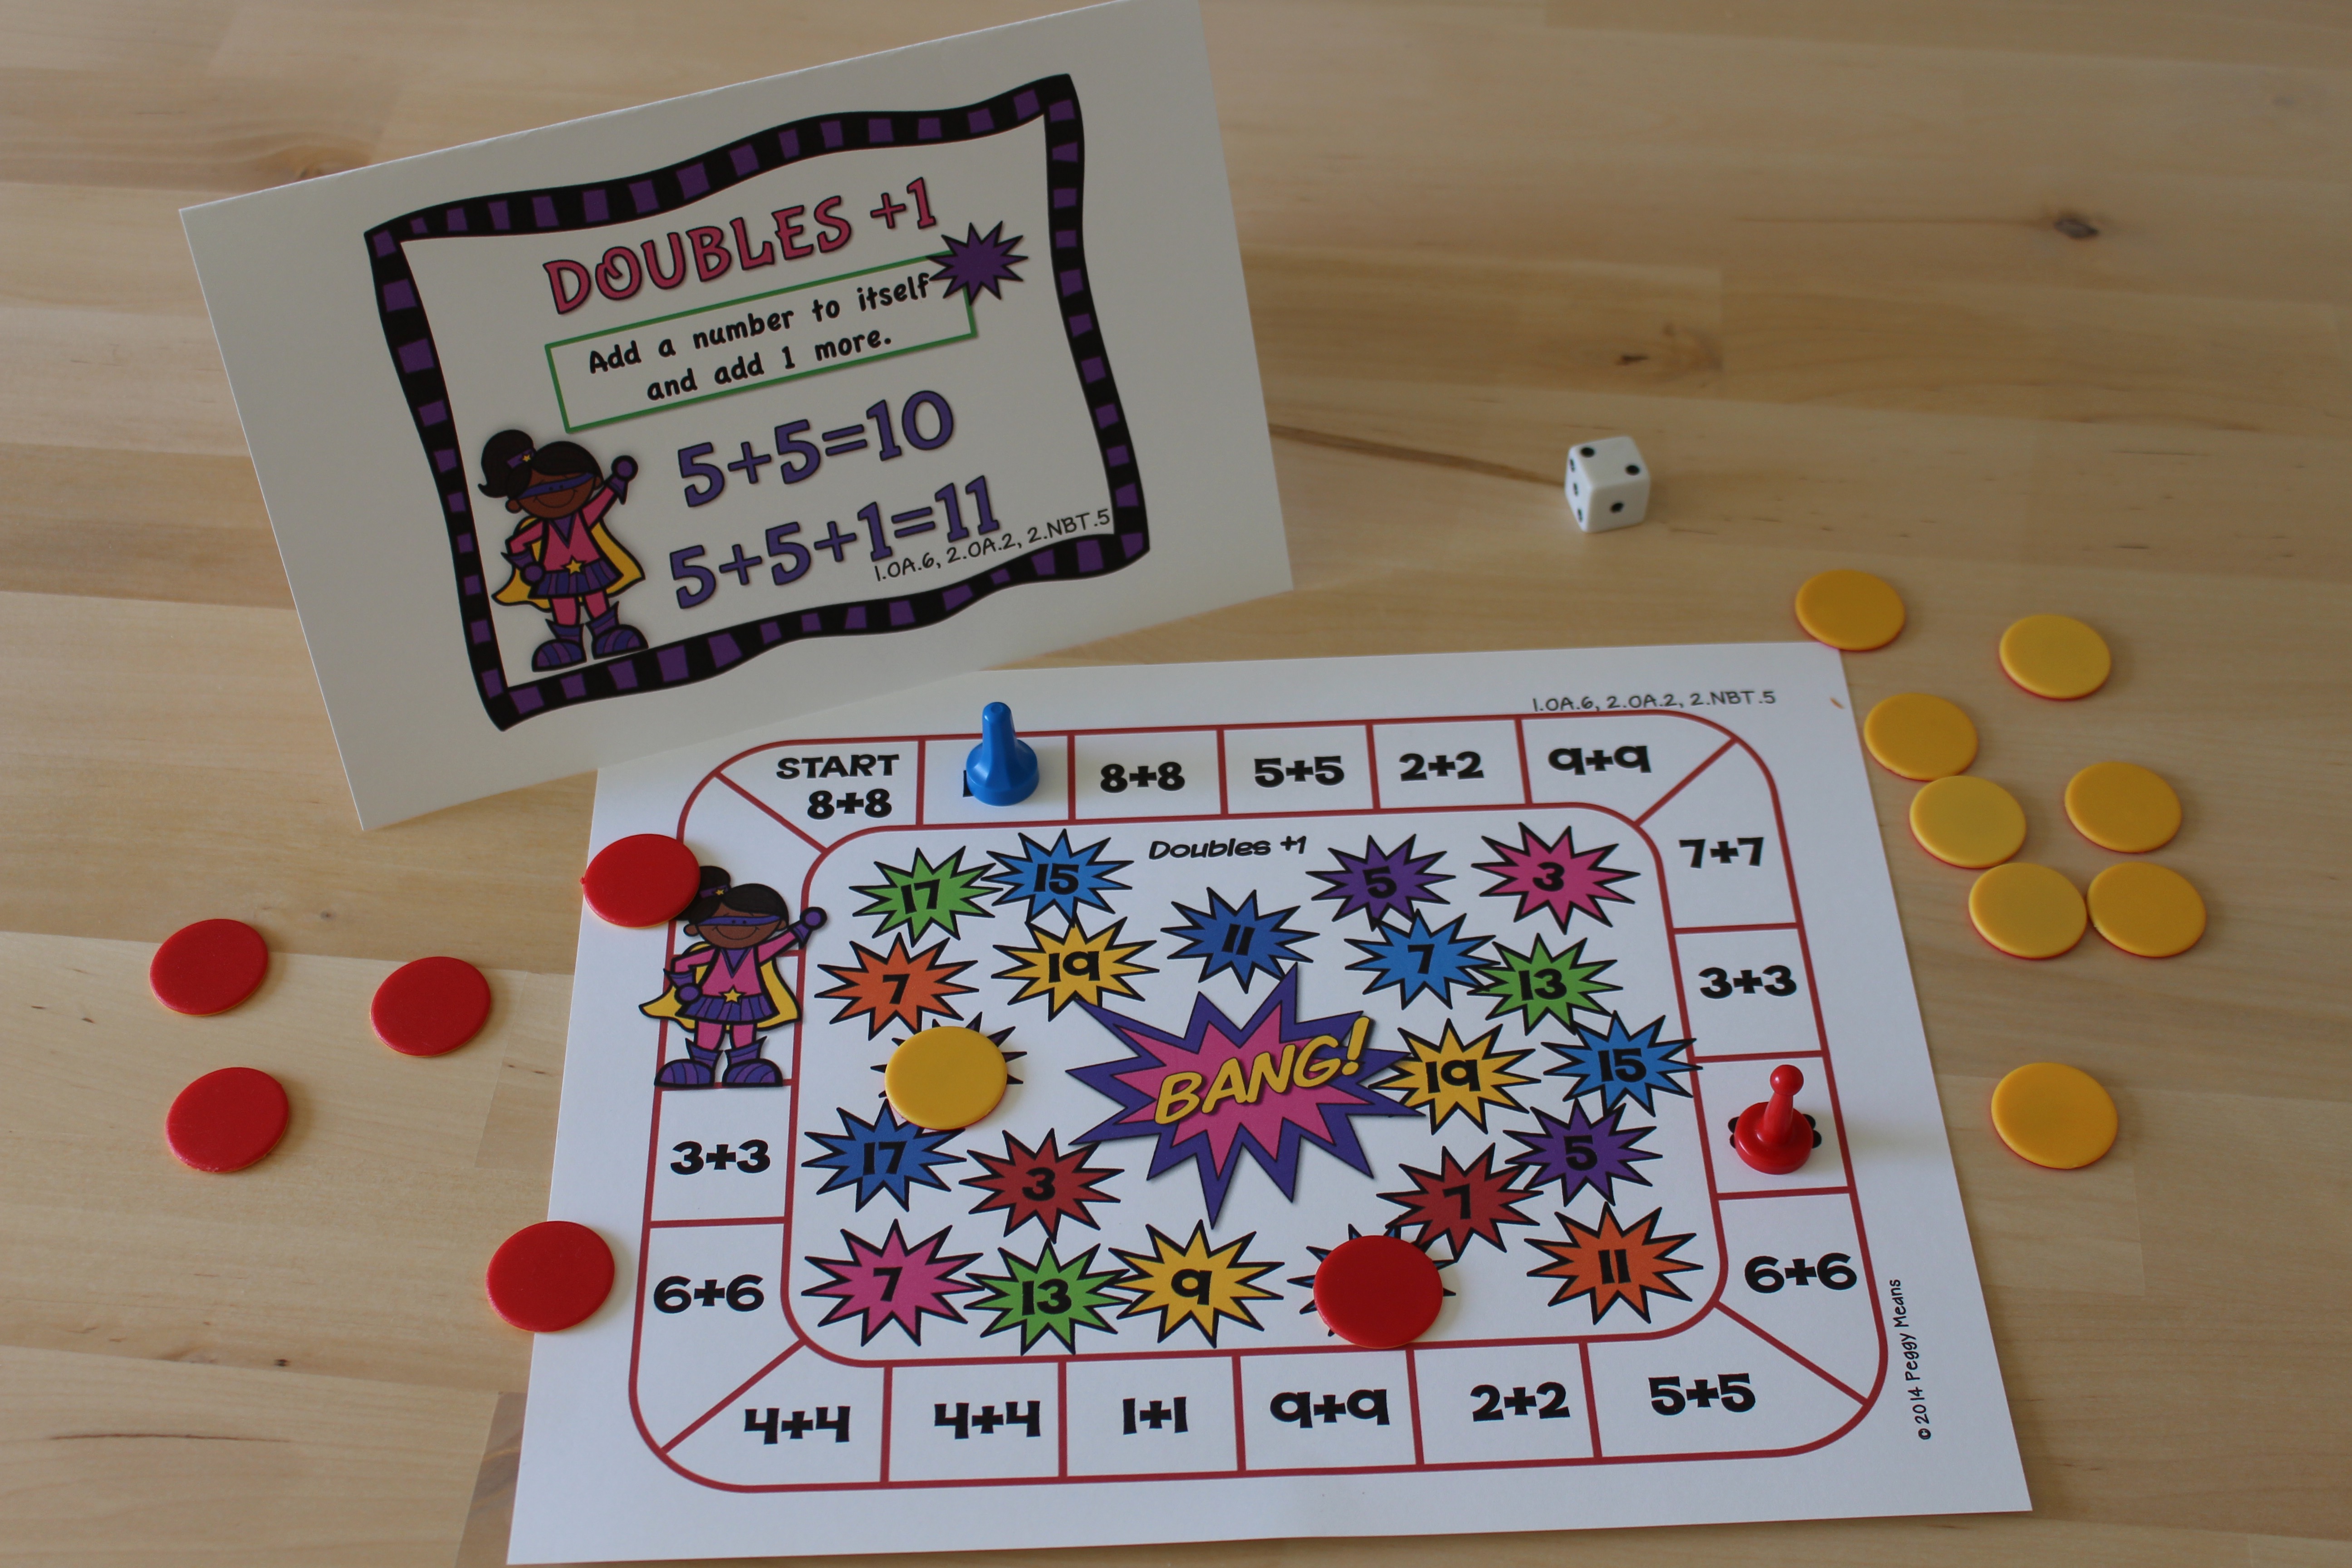 Your students will enjoy playing these engaging Super Hero games with their friends and becoming more fluent in their addition math facts in the process! Learning. Games provide a fun, not-threatening opportunity for students to get the needed practice to become fluent in their math facts.